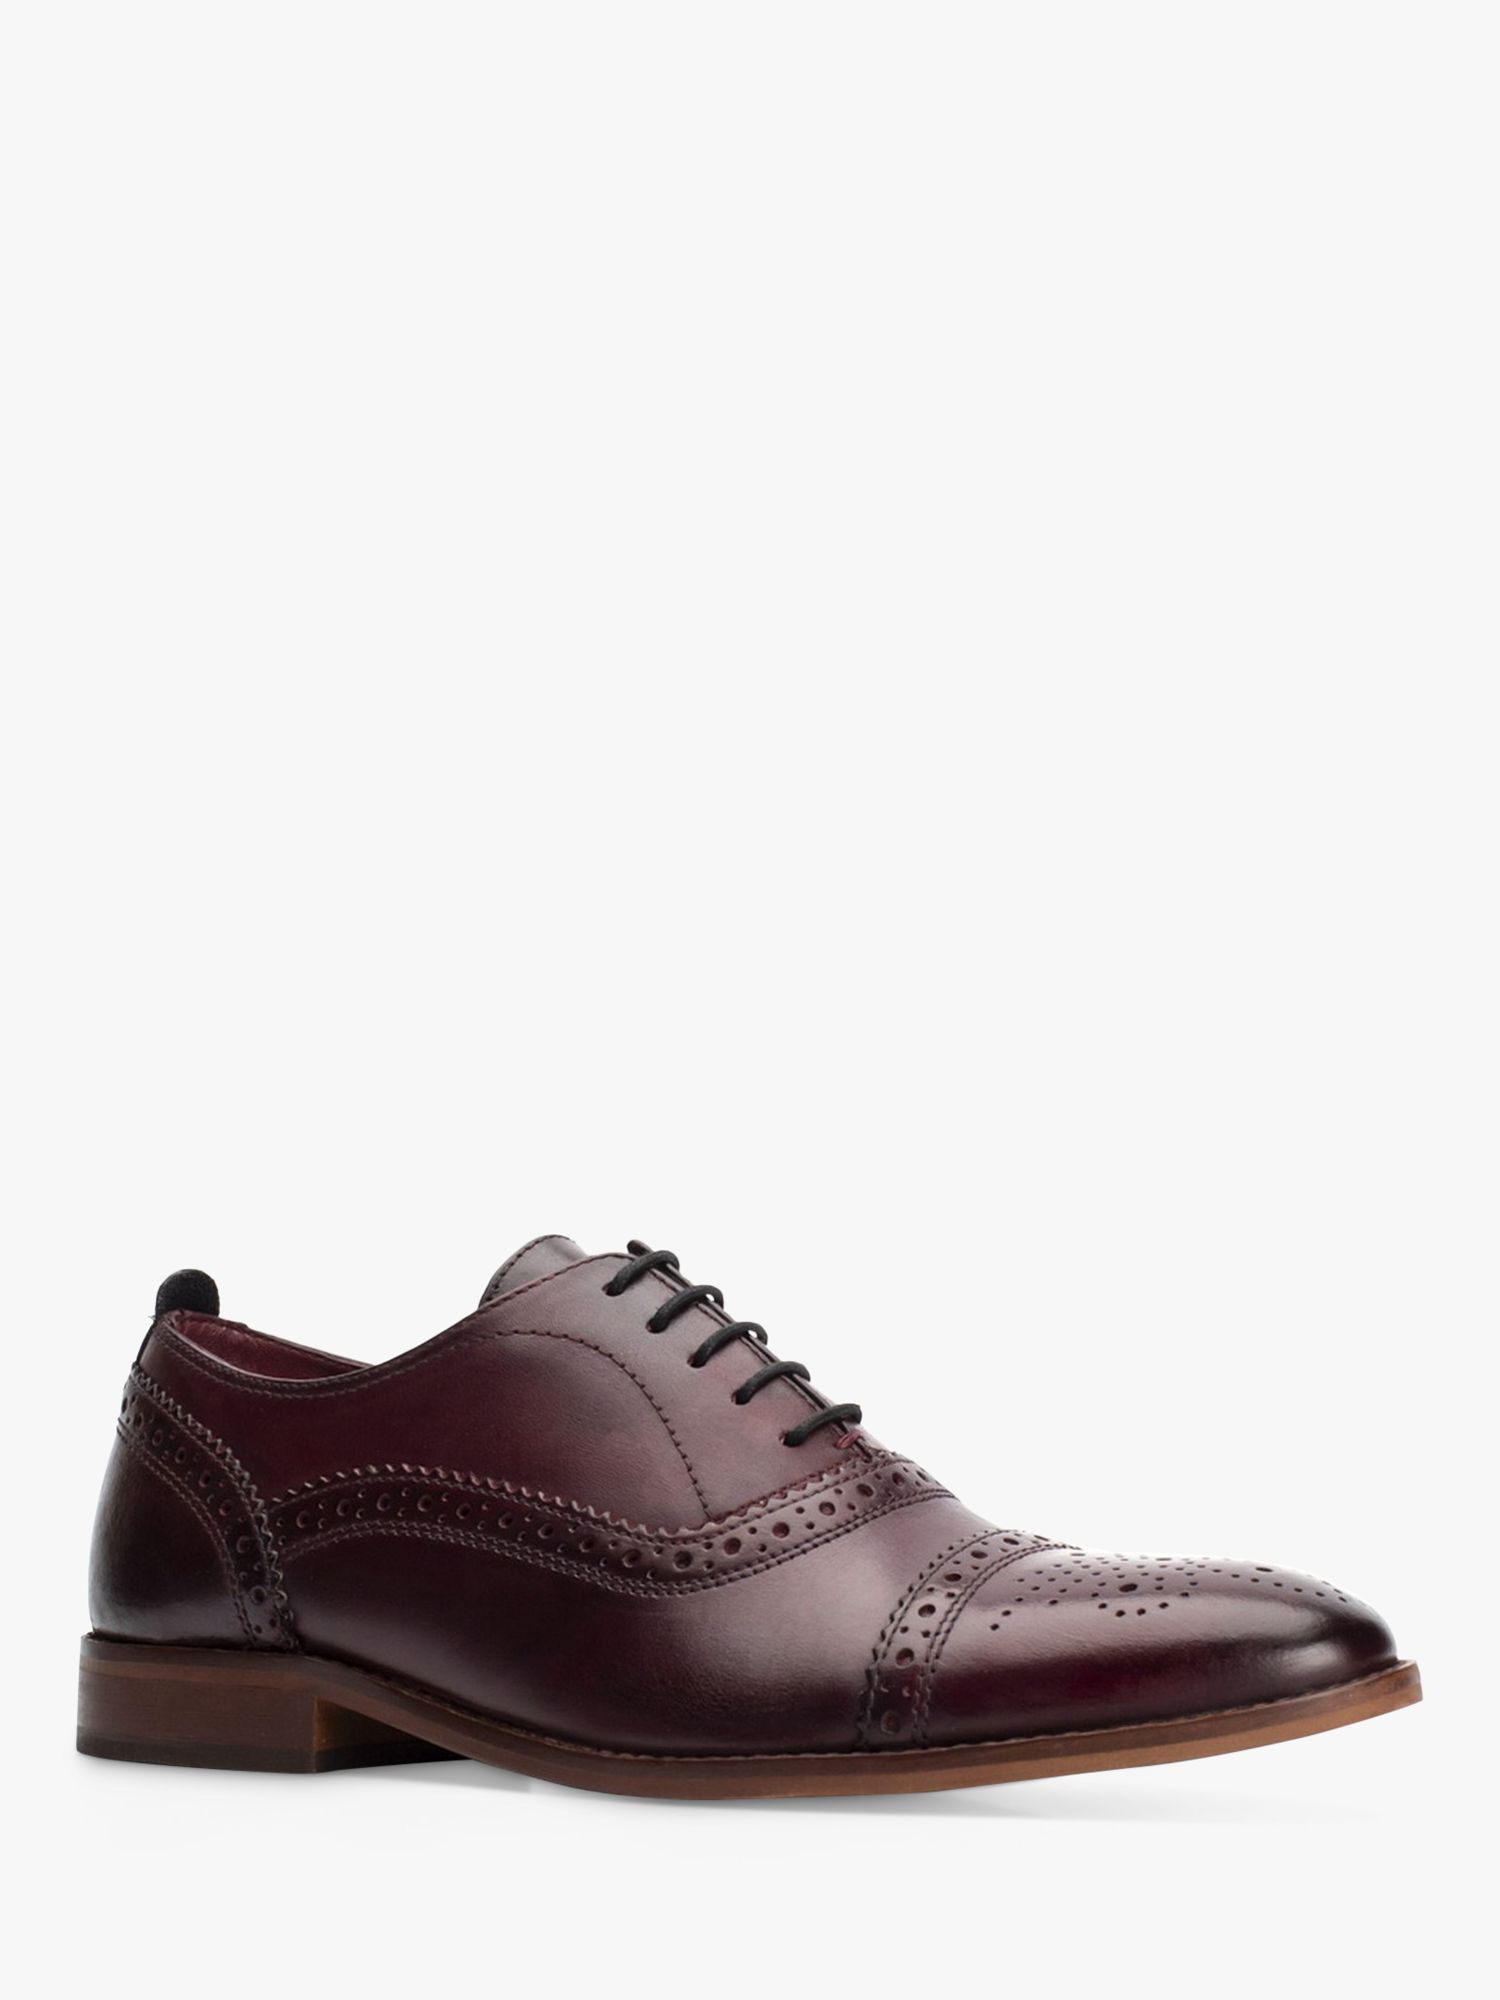 Buy Base London Cast Washed Leather Oxford Shoes, Dark Red Online at johnlewis.com